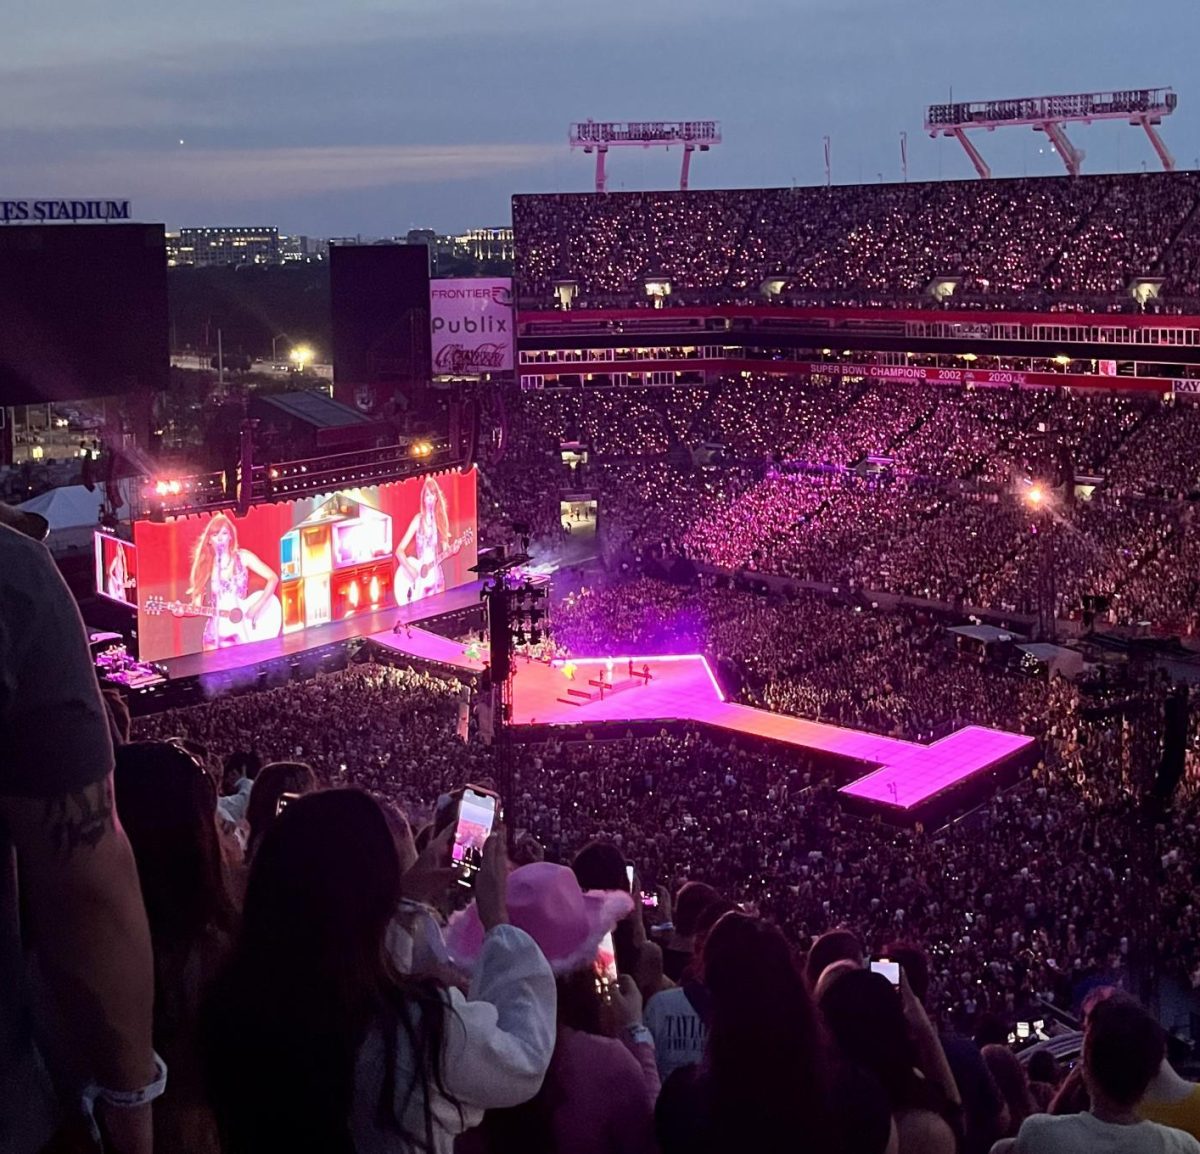 Taylor Swift performing on April 15th at the Raymond James Stadium to a sold-out stadium.